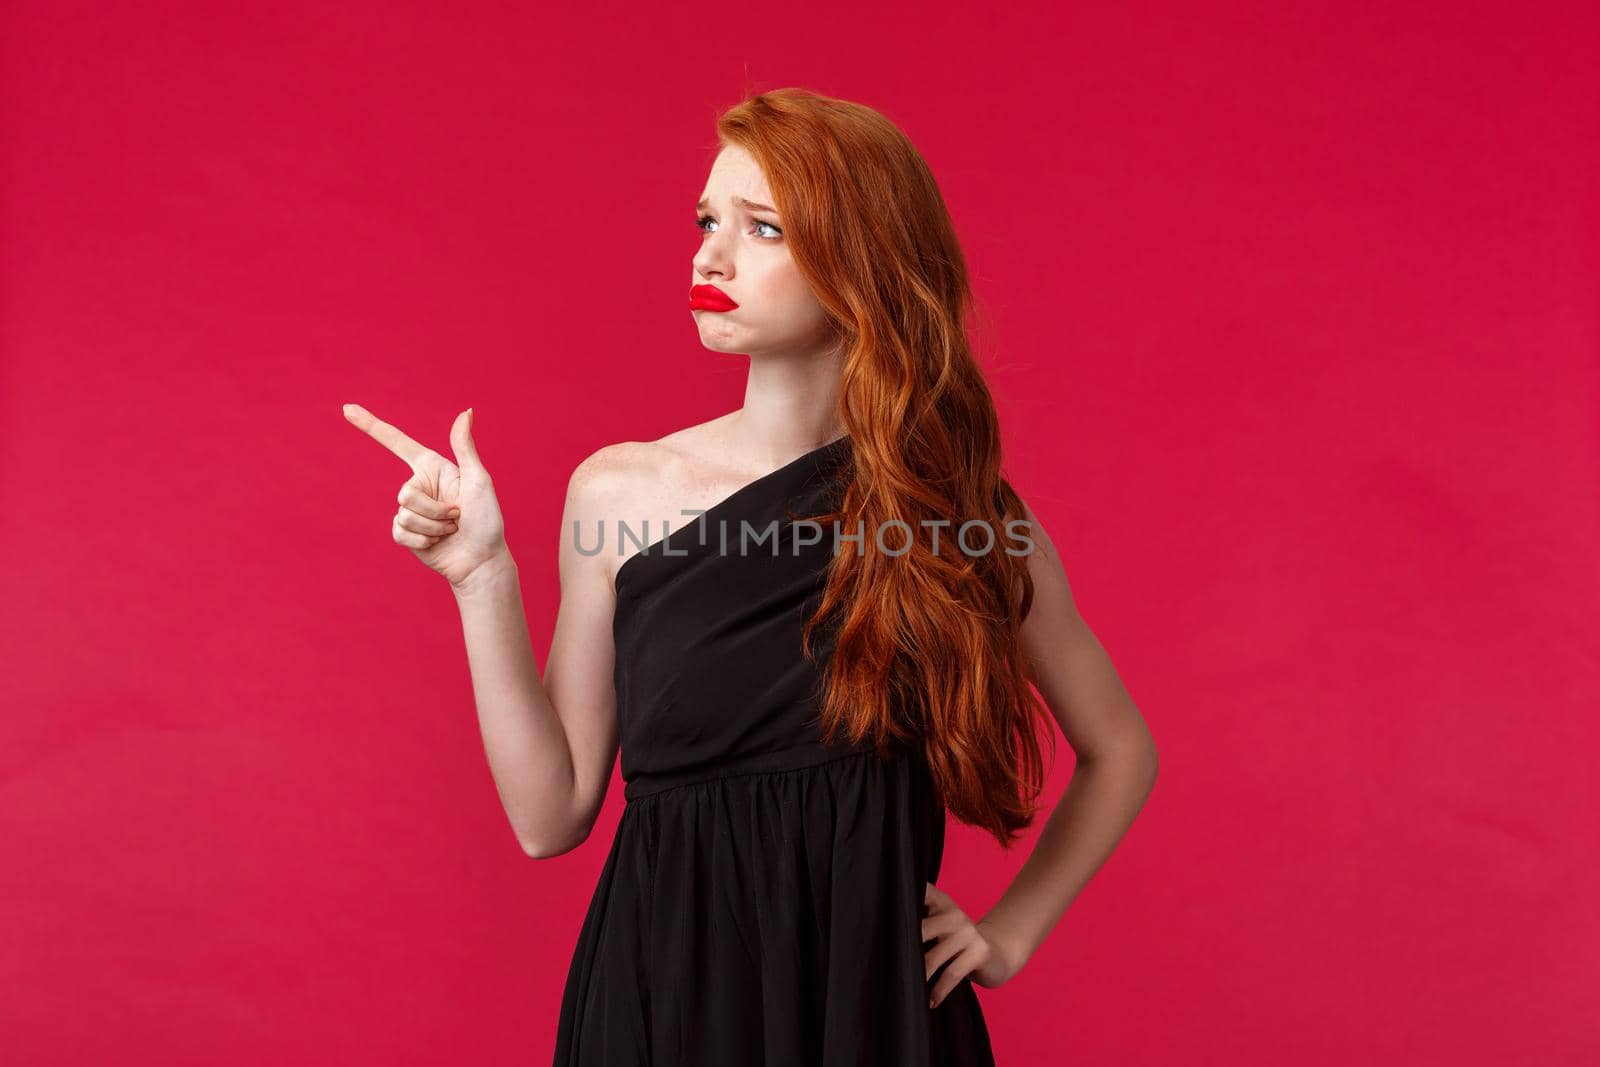 Portrait of sad and pity cute redhead woman in elegant black dress, sympathizing showing empathy, grimacing distressed and lonely, pointing looking left with regret, red background.